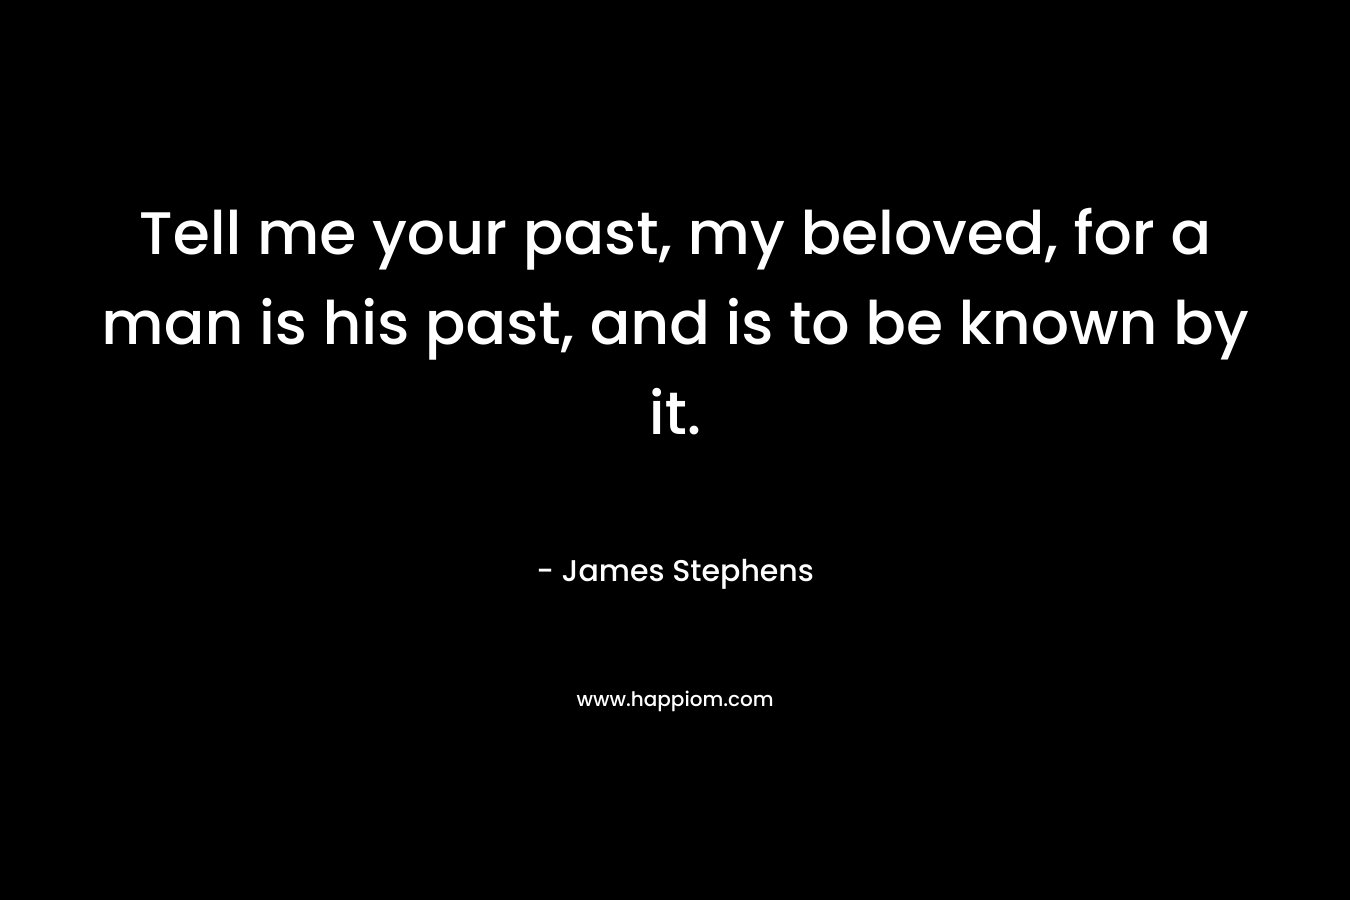 Tell me your past, my beloved, for a man is his past, and is to be known by it.